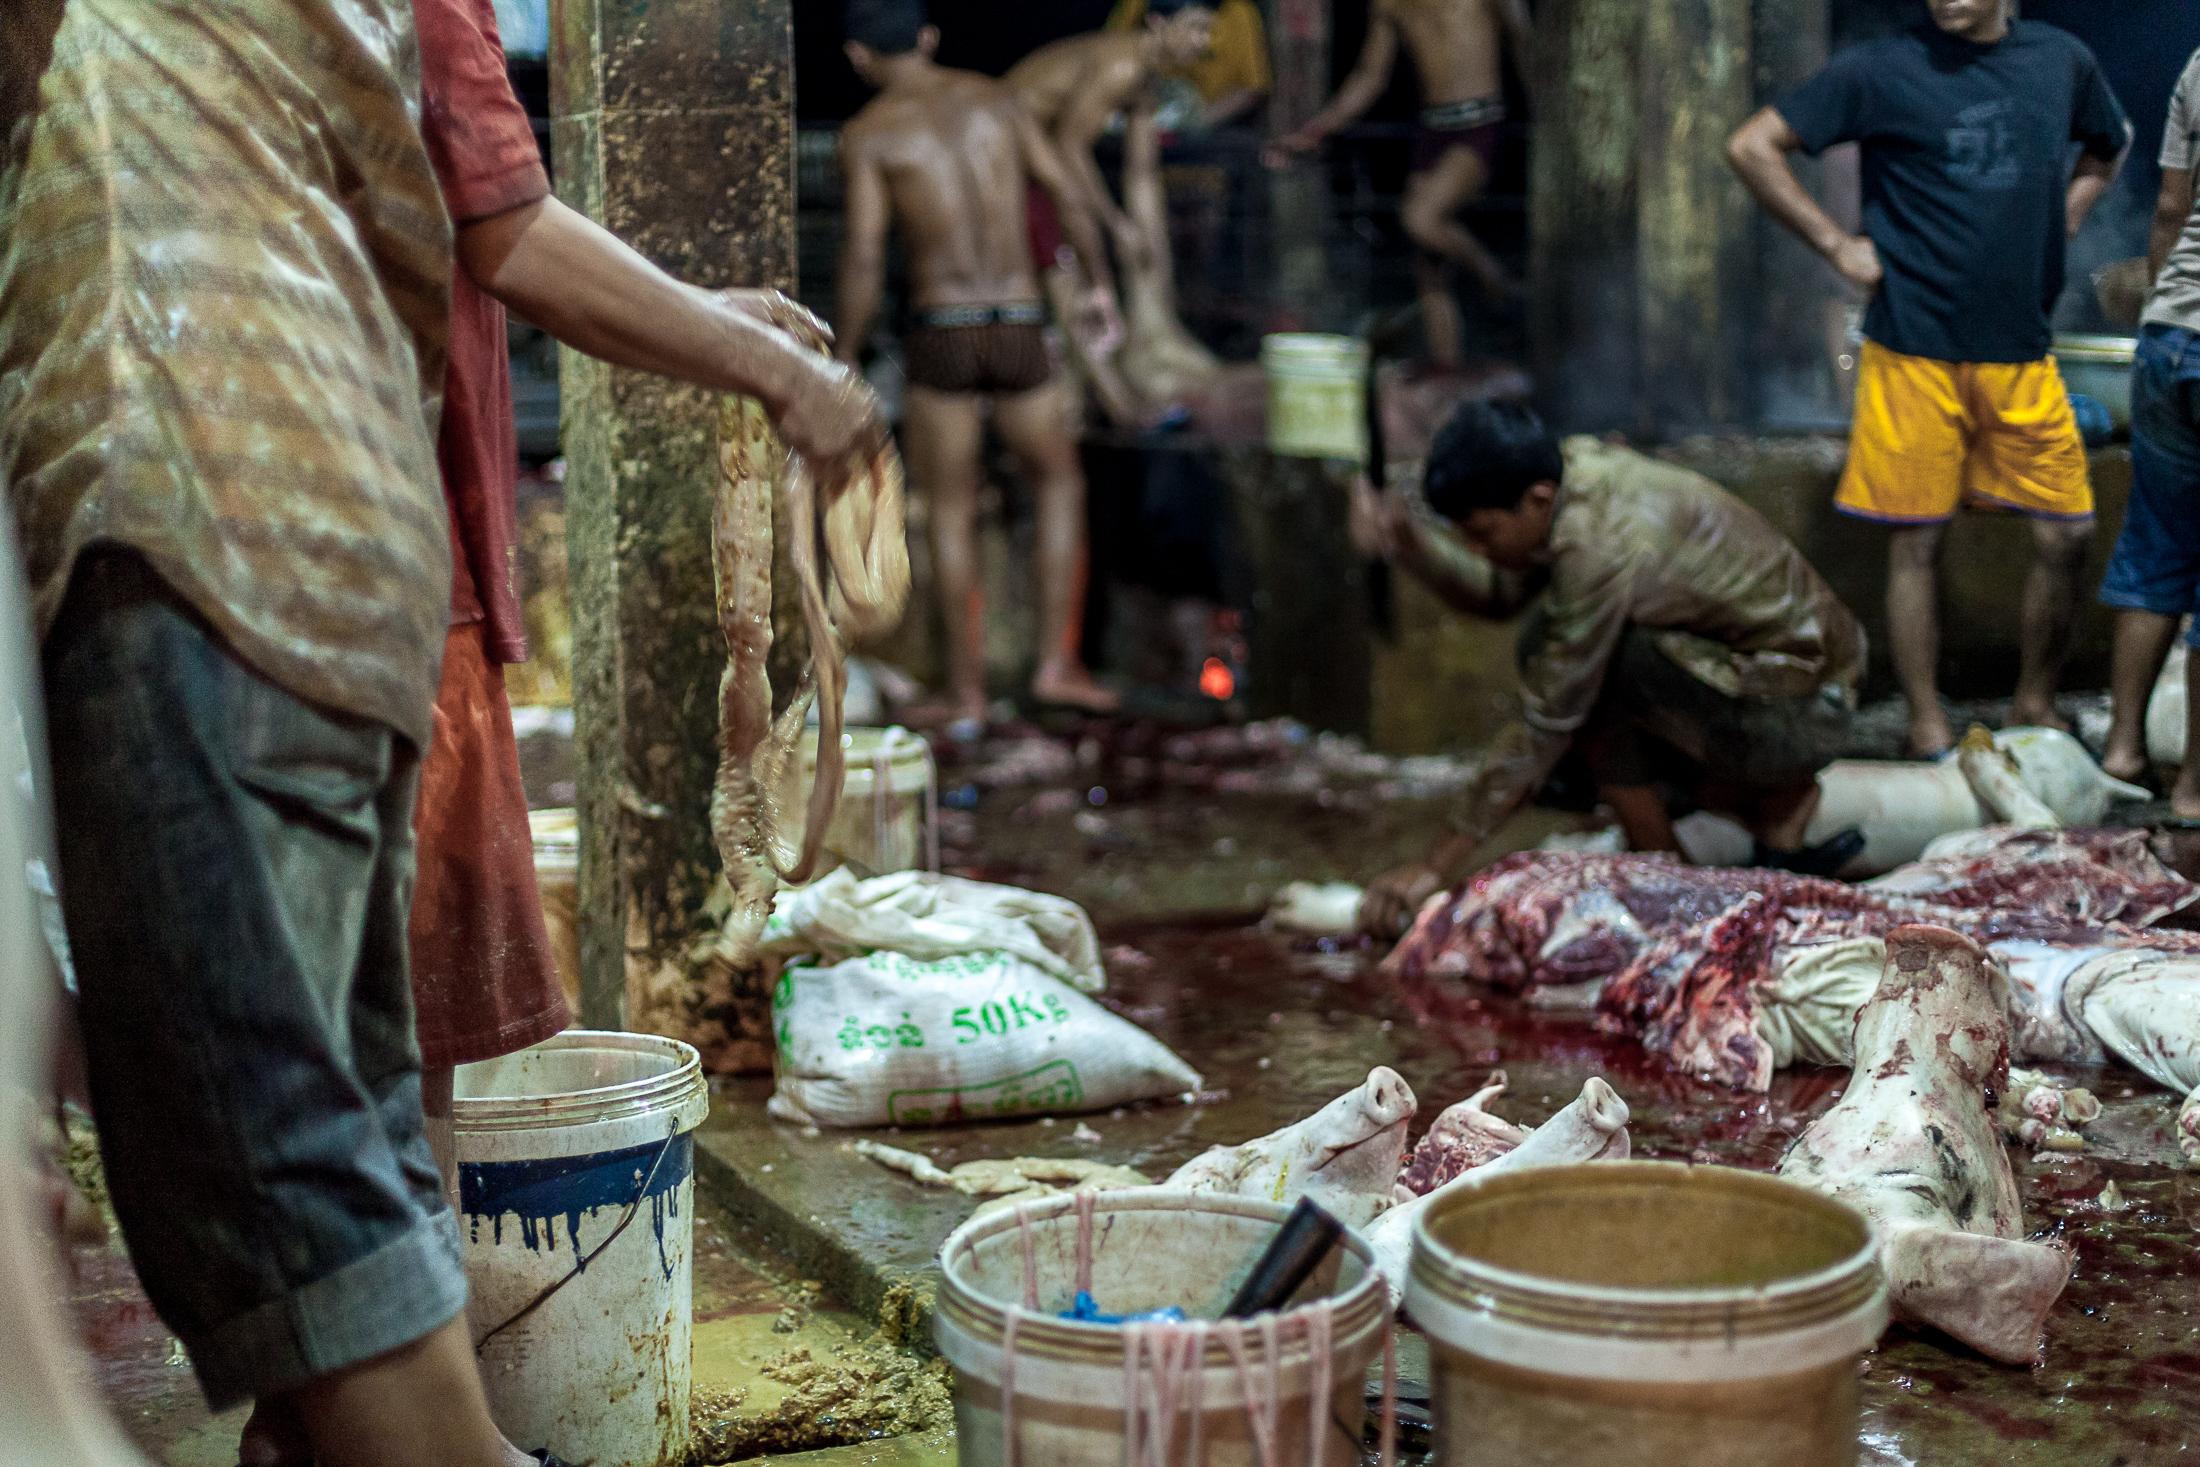 Inside a Cambodian Slaughterhouse - SIEM REAP, CAMBODIA - FEBRUARY 22: Workers cut up dead...